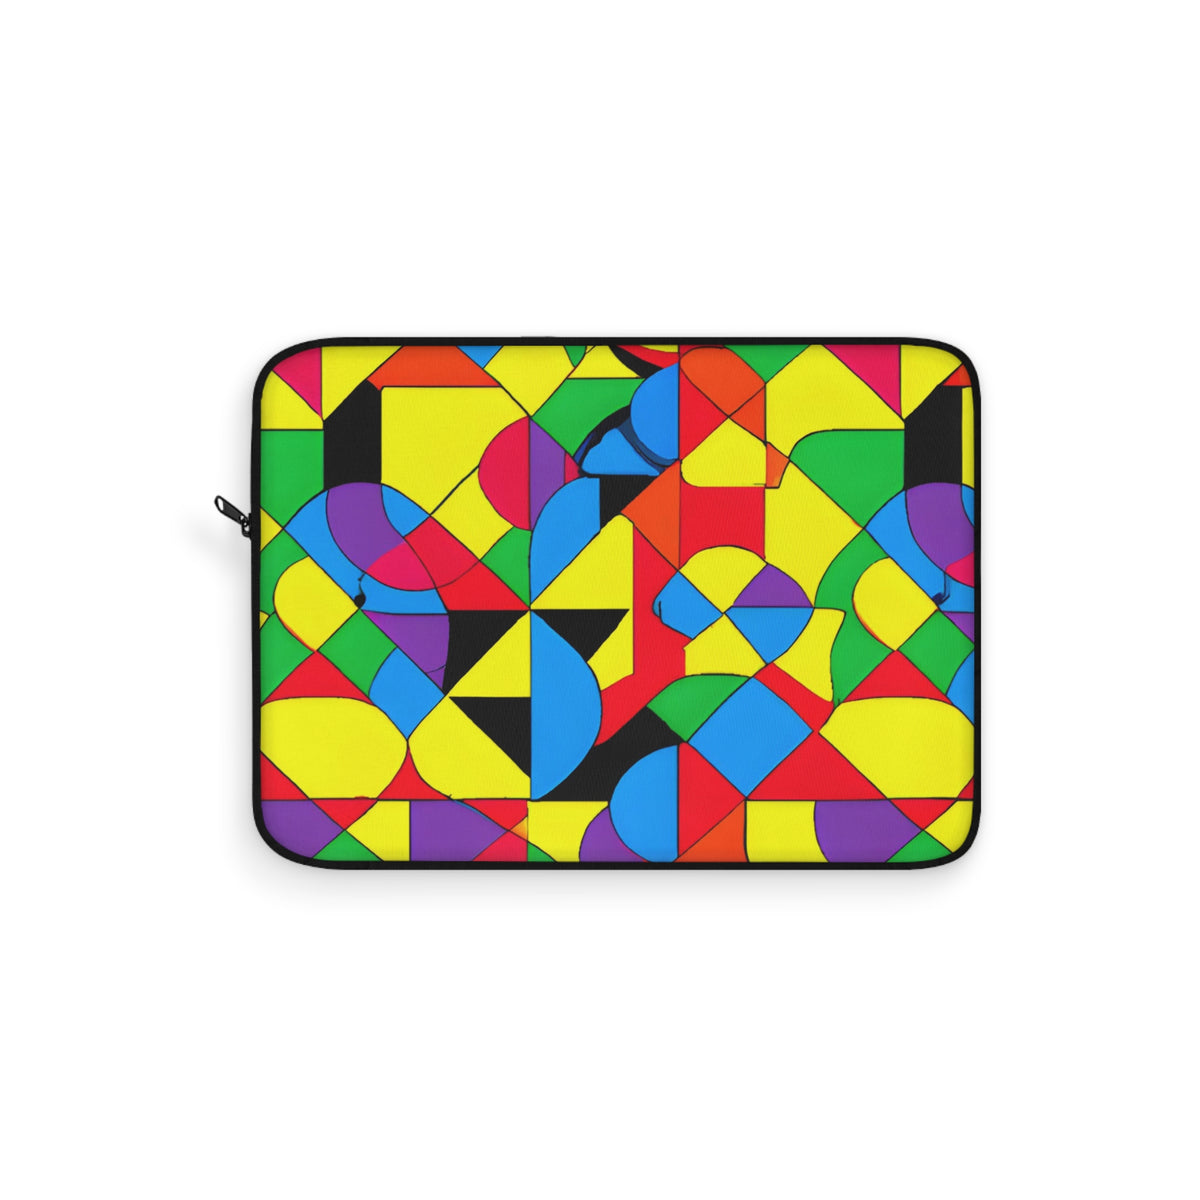 MirageSky - Gay-Inspired Laptop Sleeve (12", 13", 15")